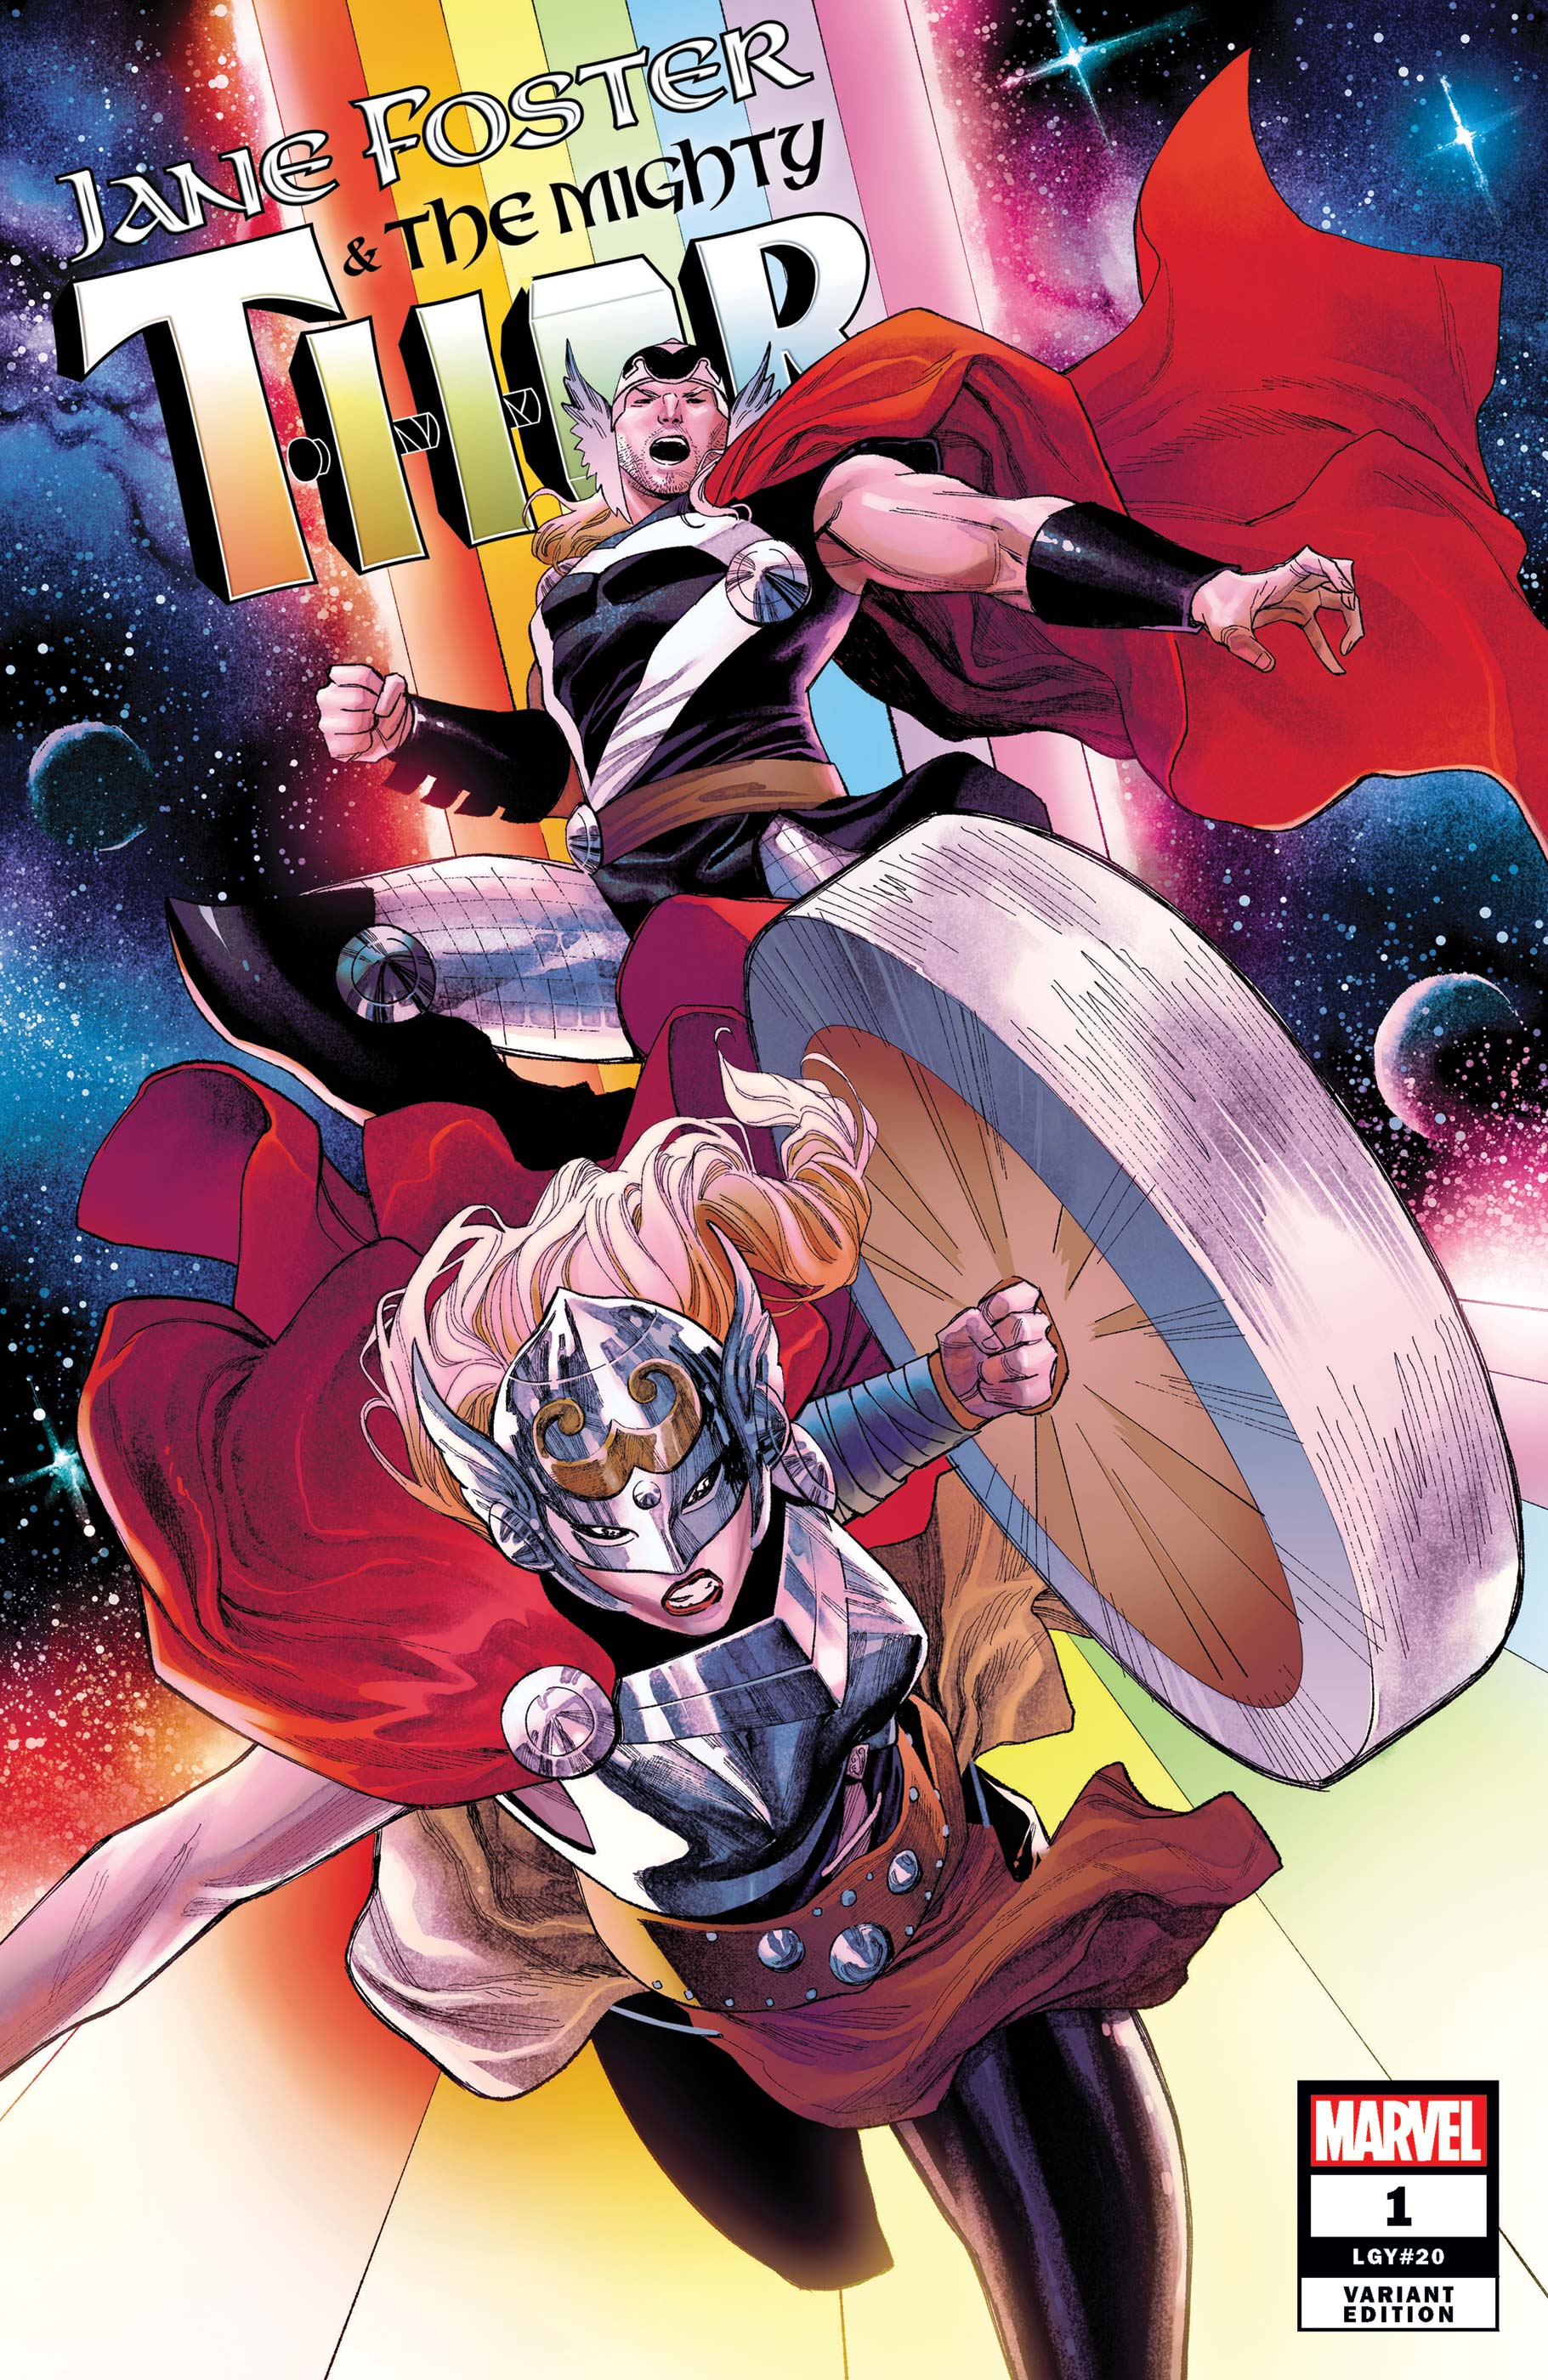 Jane Foster & the Mighty Thor (2022) #1 (Variant)